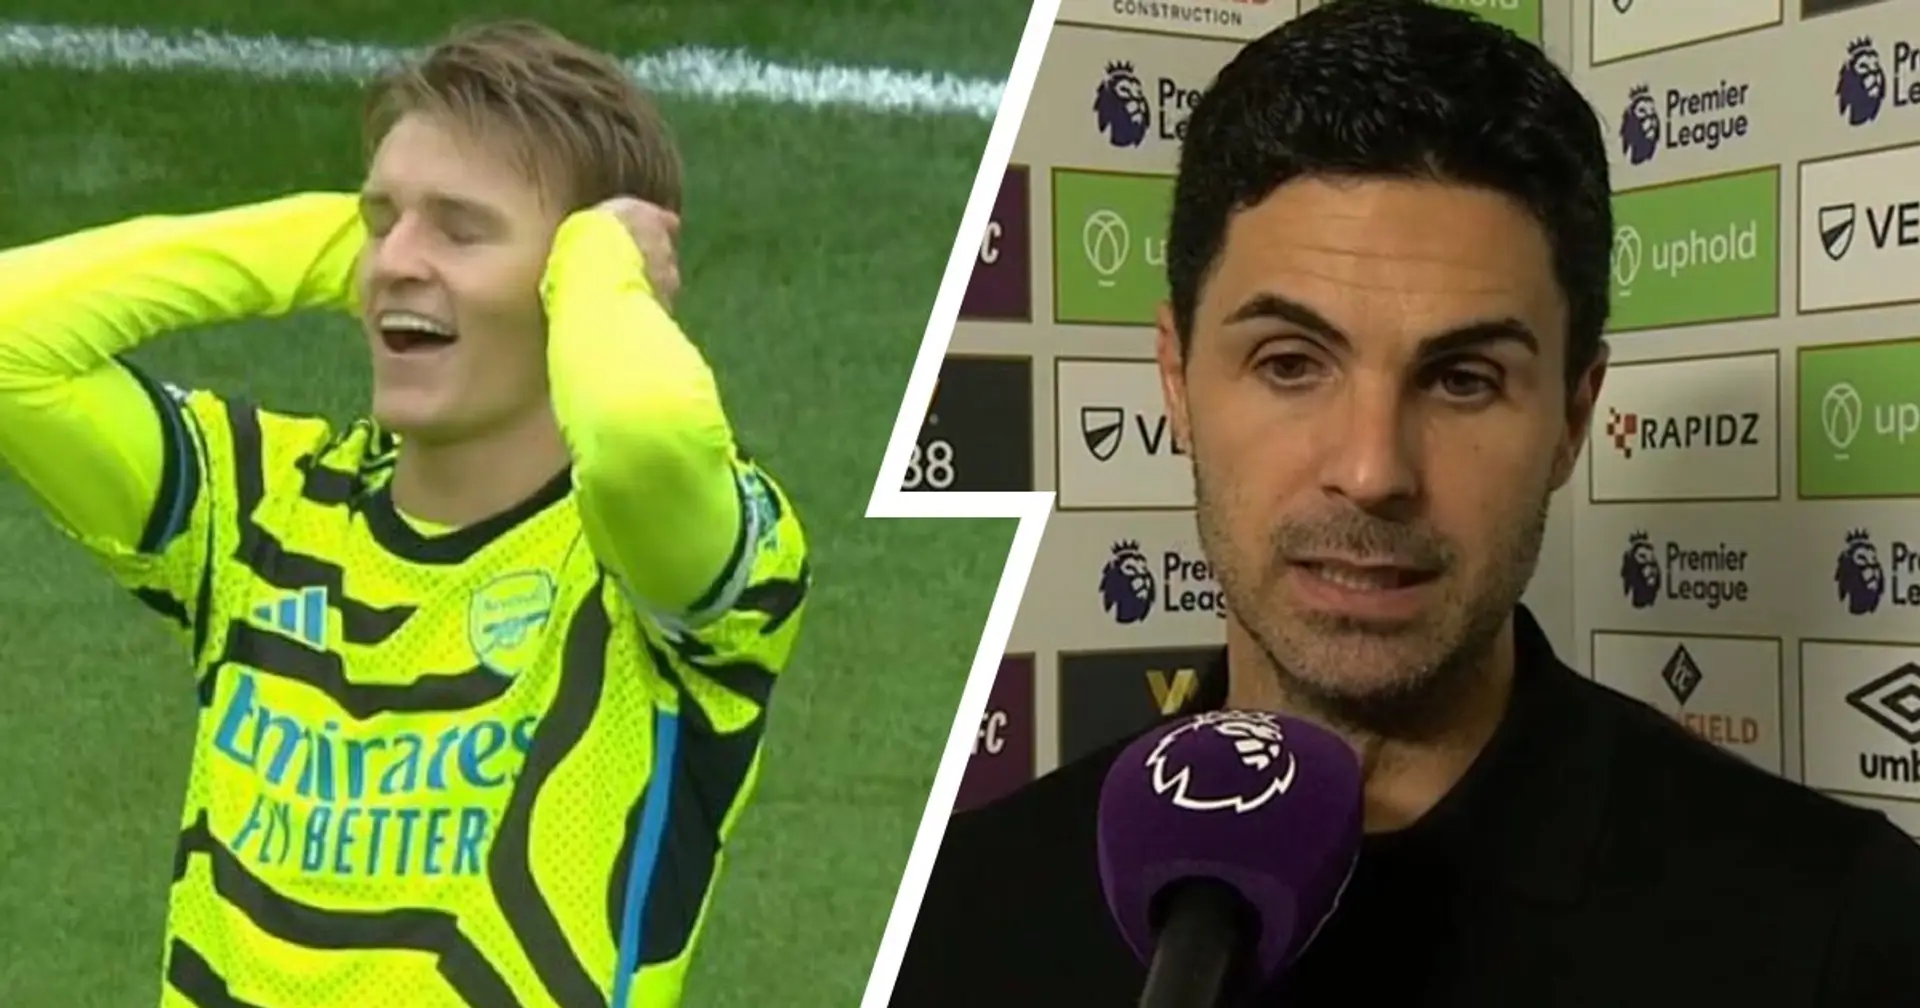 'He needs to do what he feels': Arteta reflects on Odegaard mocking celebration police in Burnley win